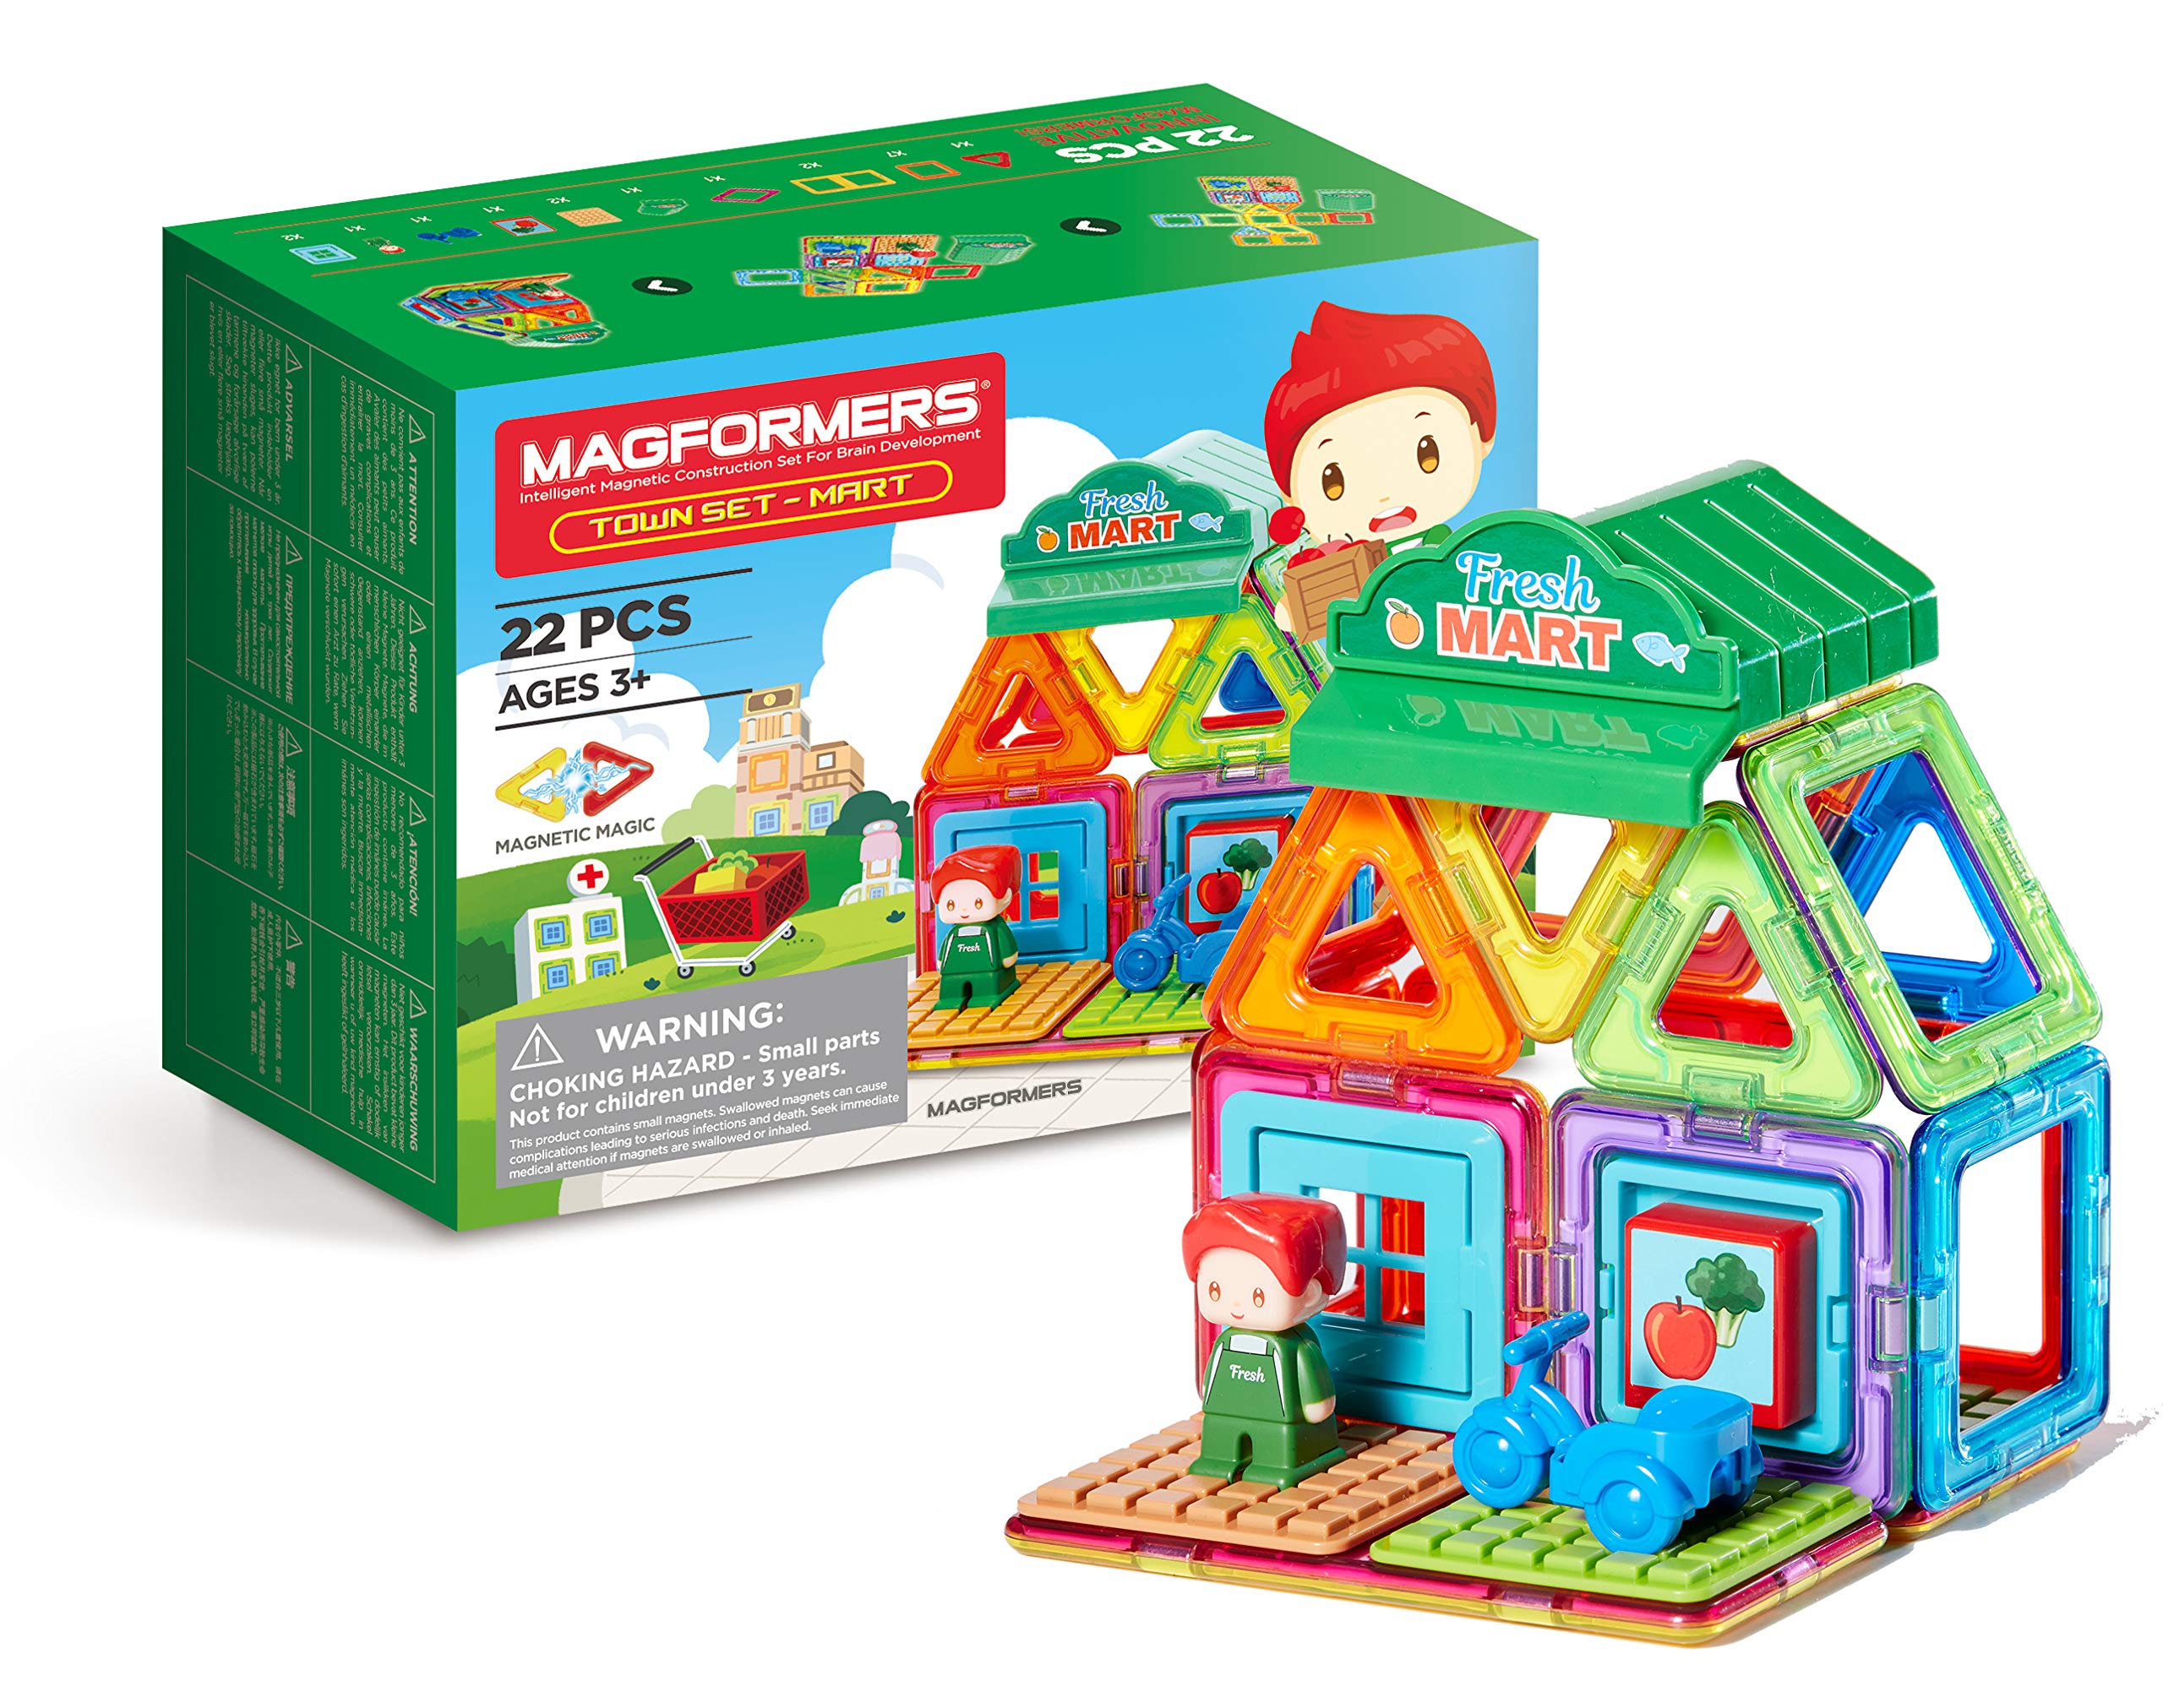 Magformers Town Minimarket Set. Magnetic Building Blocks Make Different Shops With Play Character. STEM Toy And Roleplay Toy For Creativity.